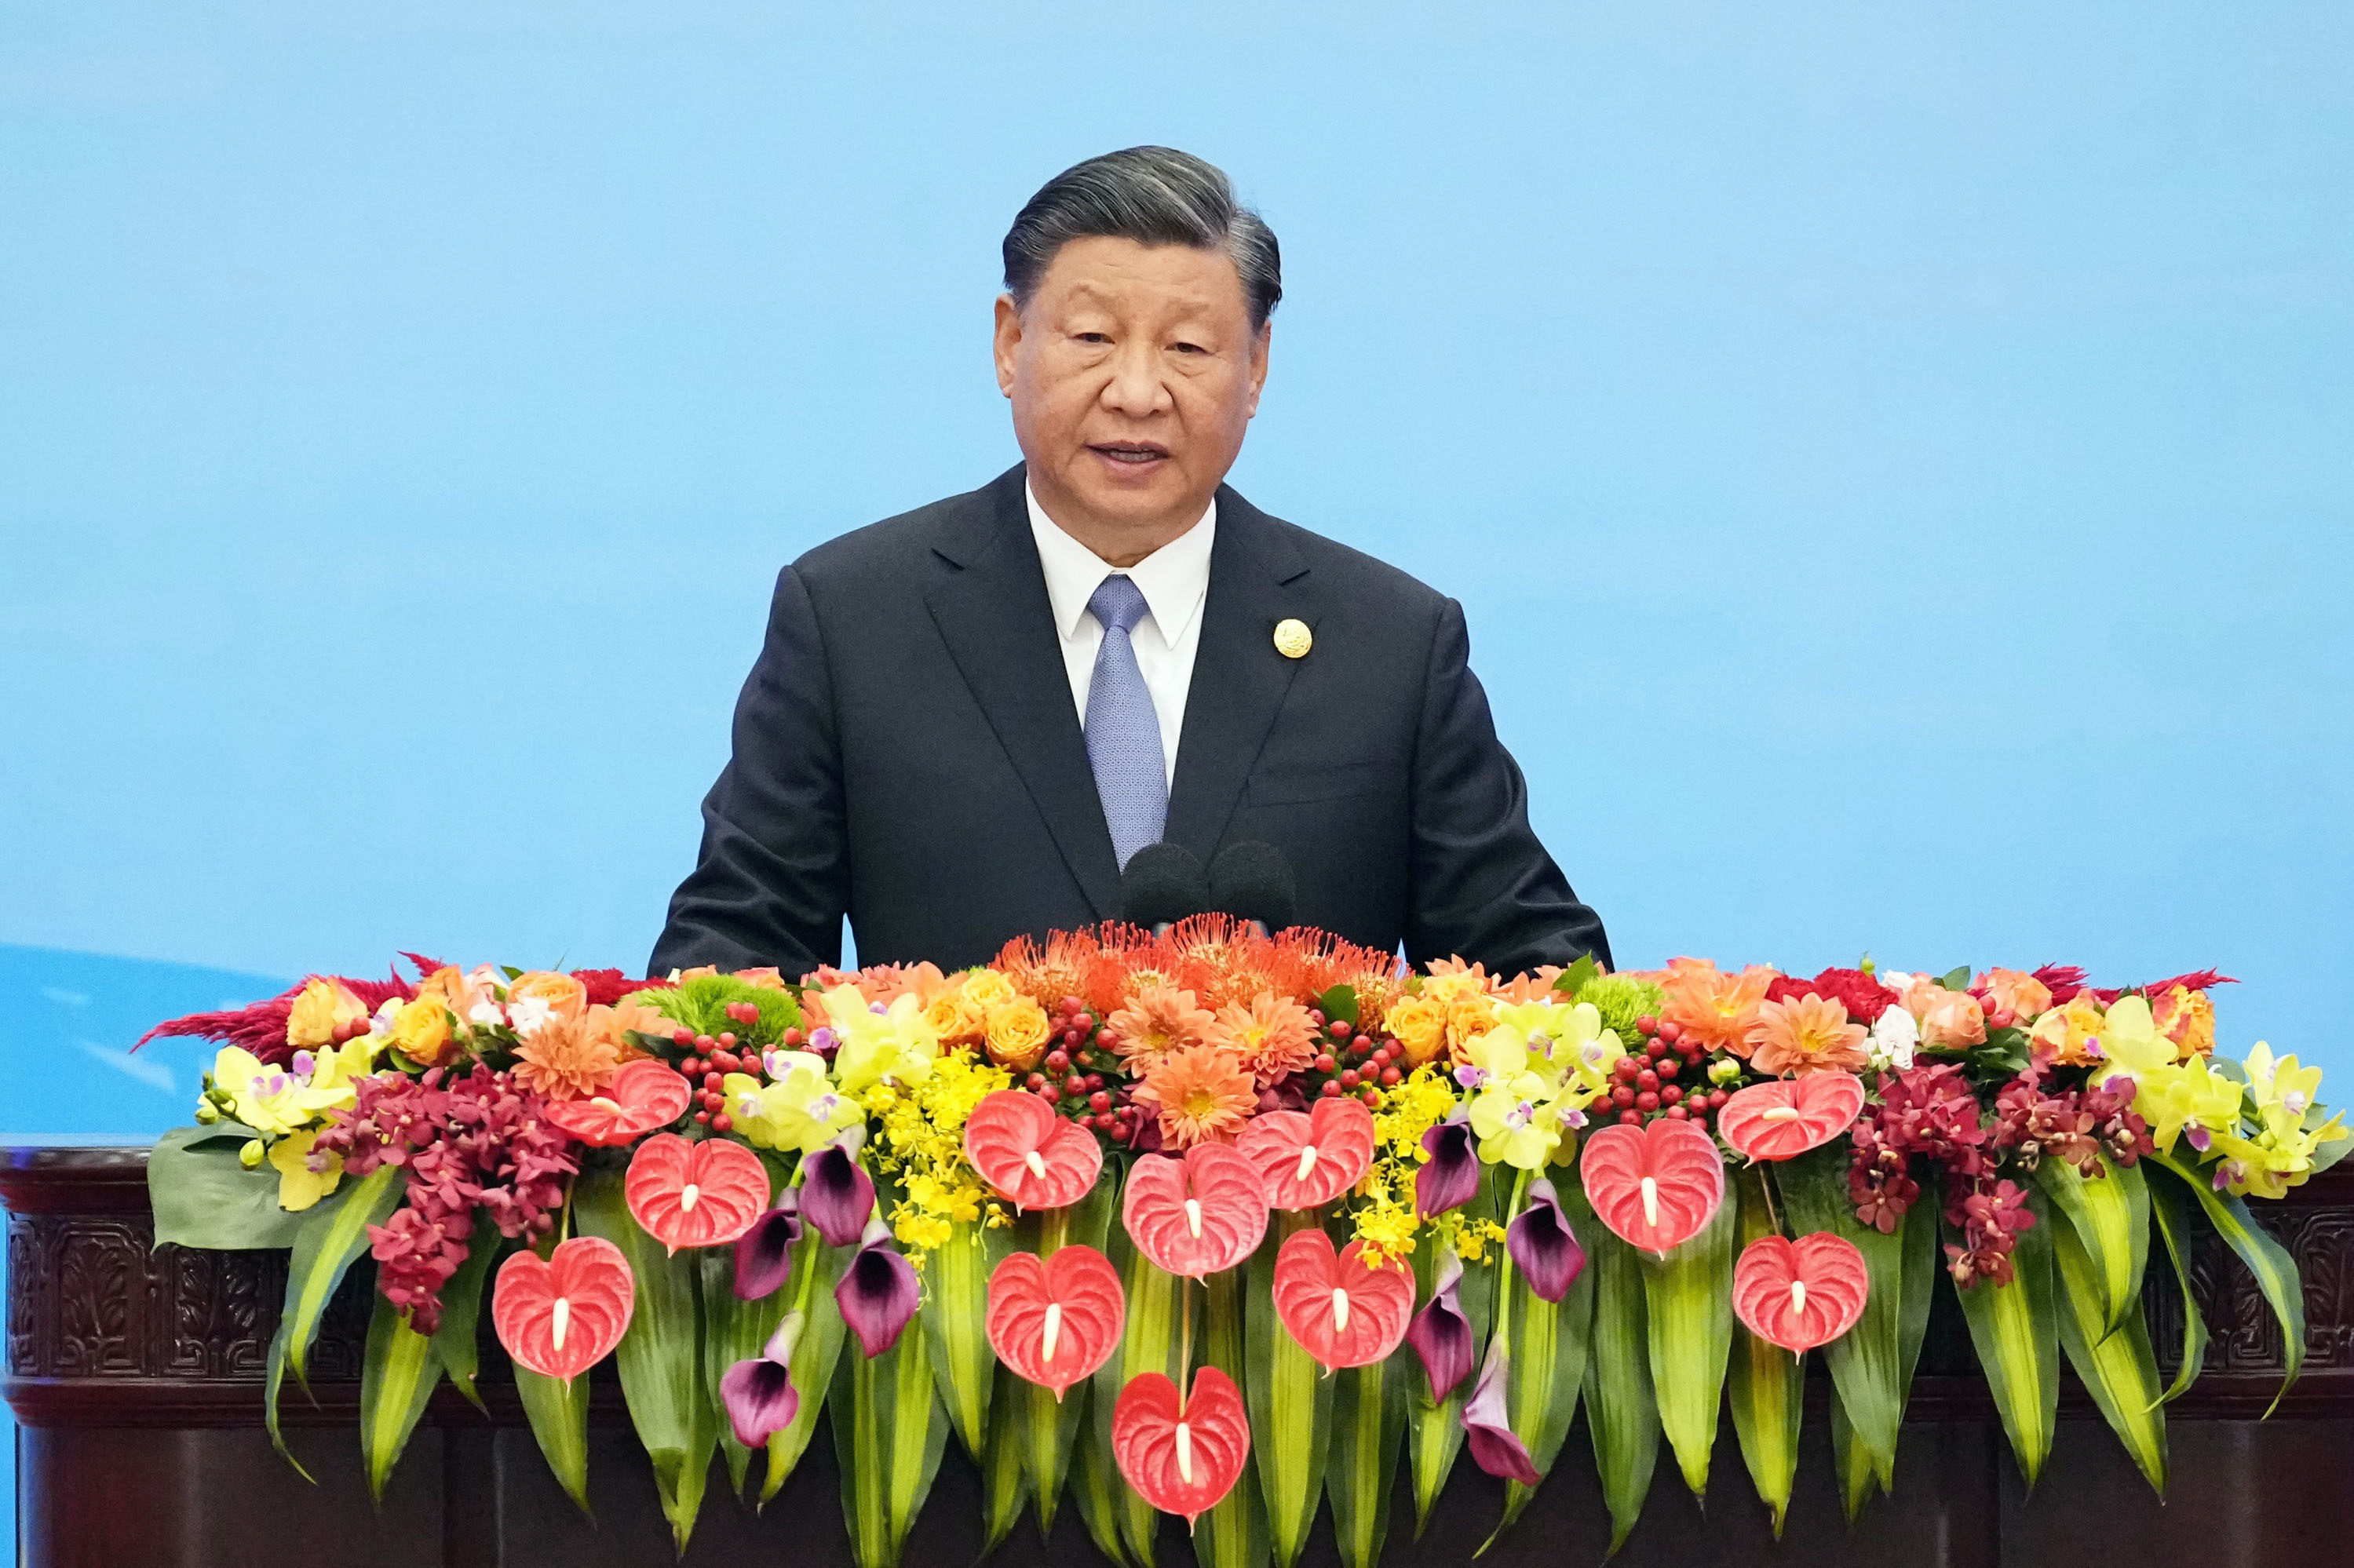 Chinese President Xi Jinping speaking at the belt and road forum on Wednesday. Photo: Kyodo